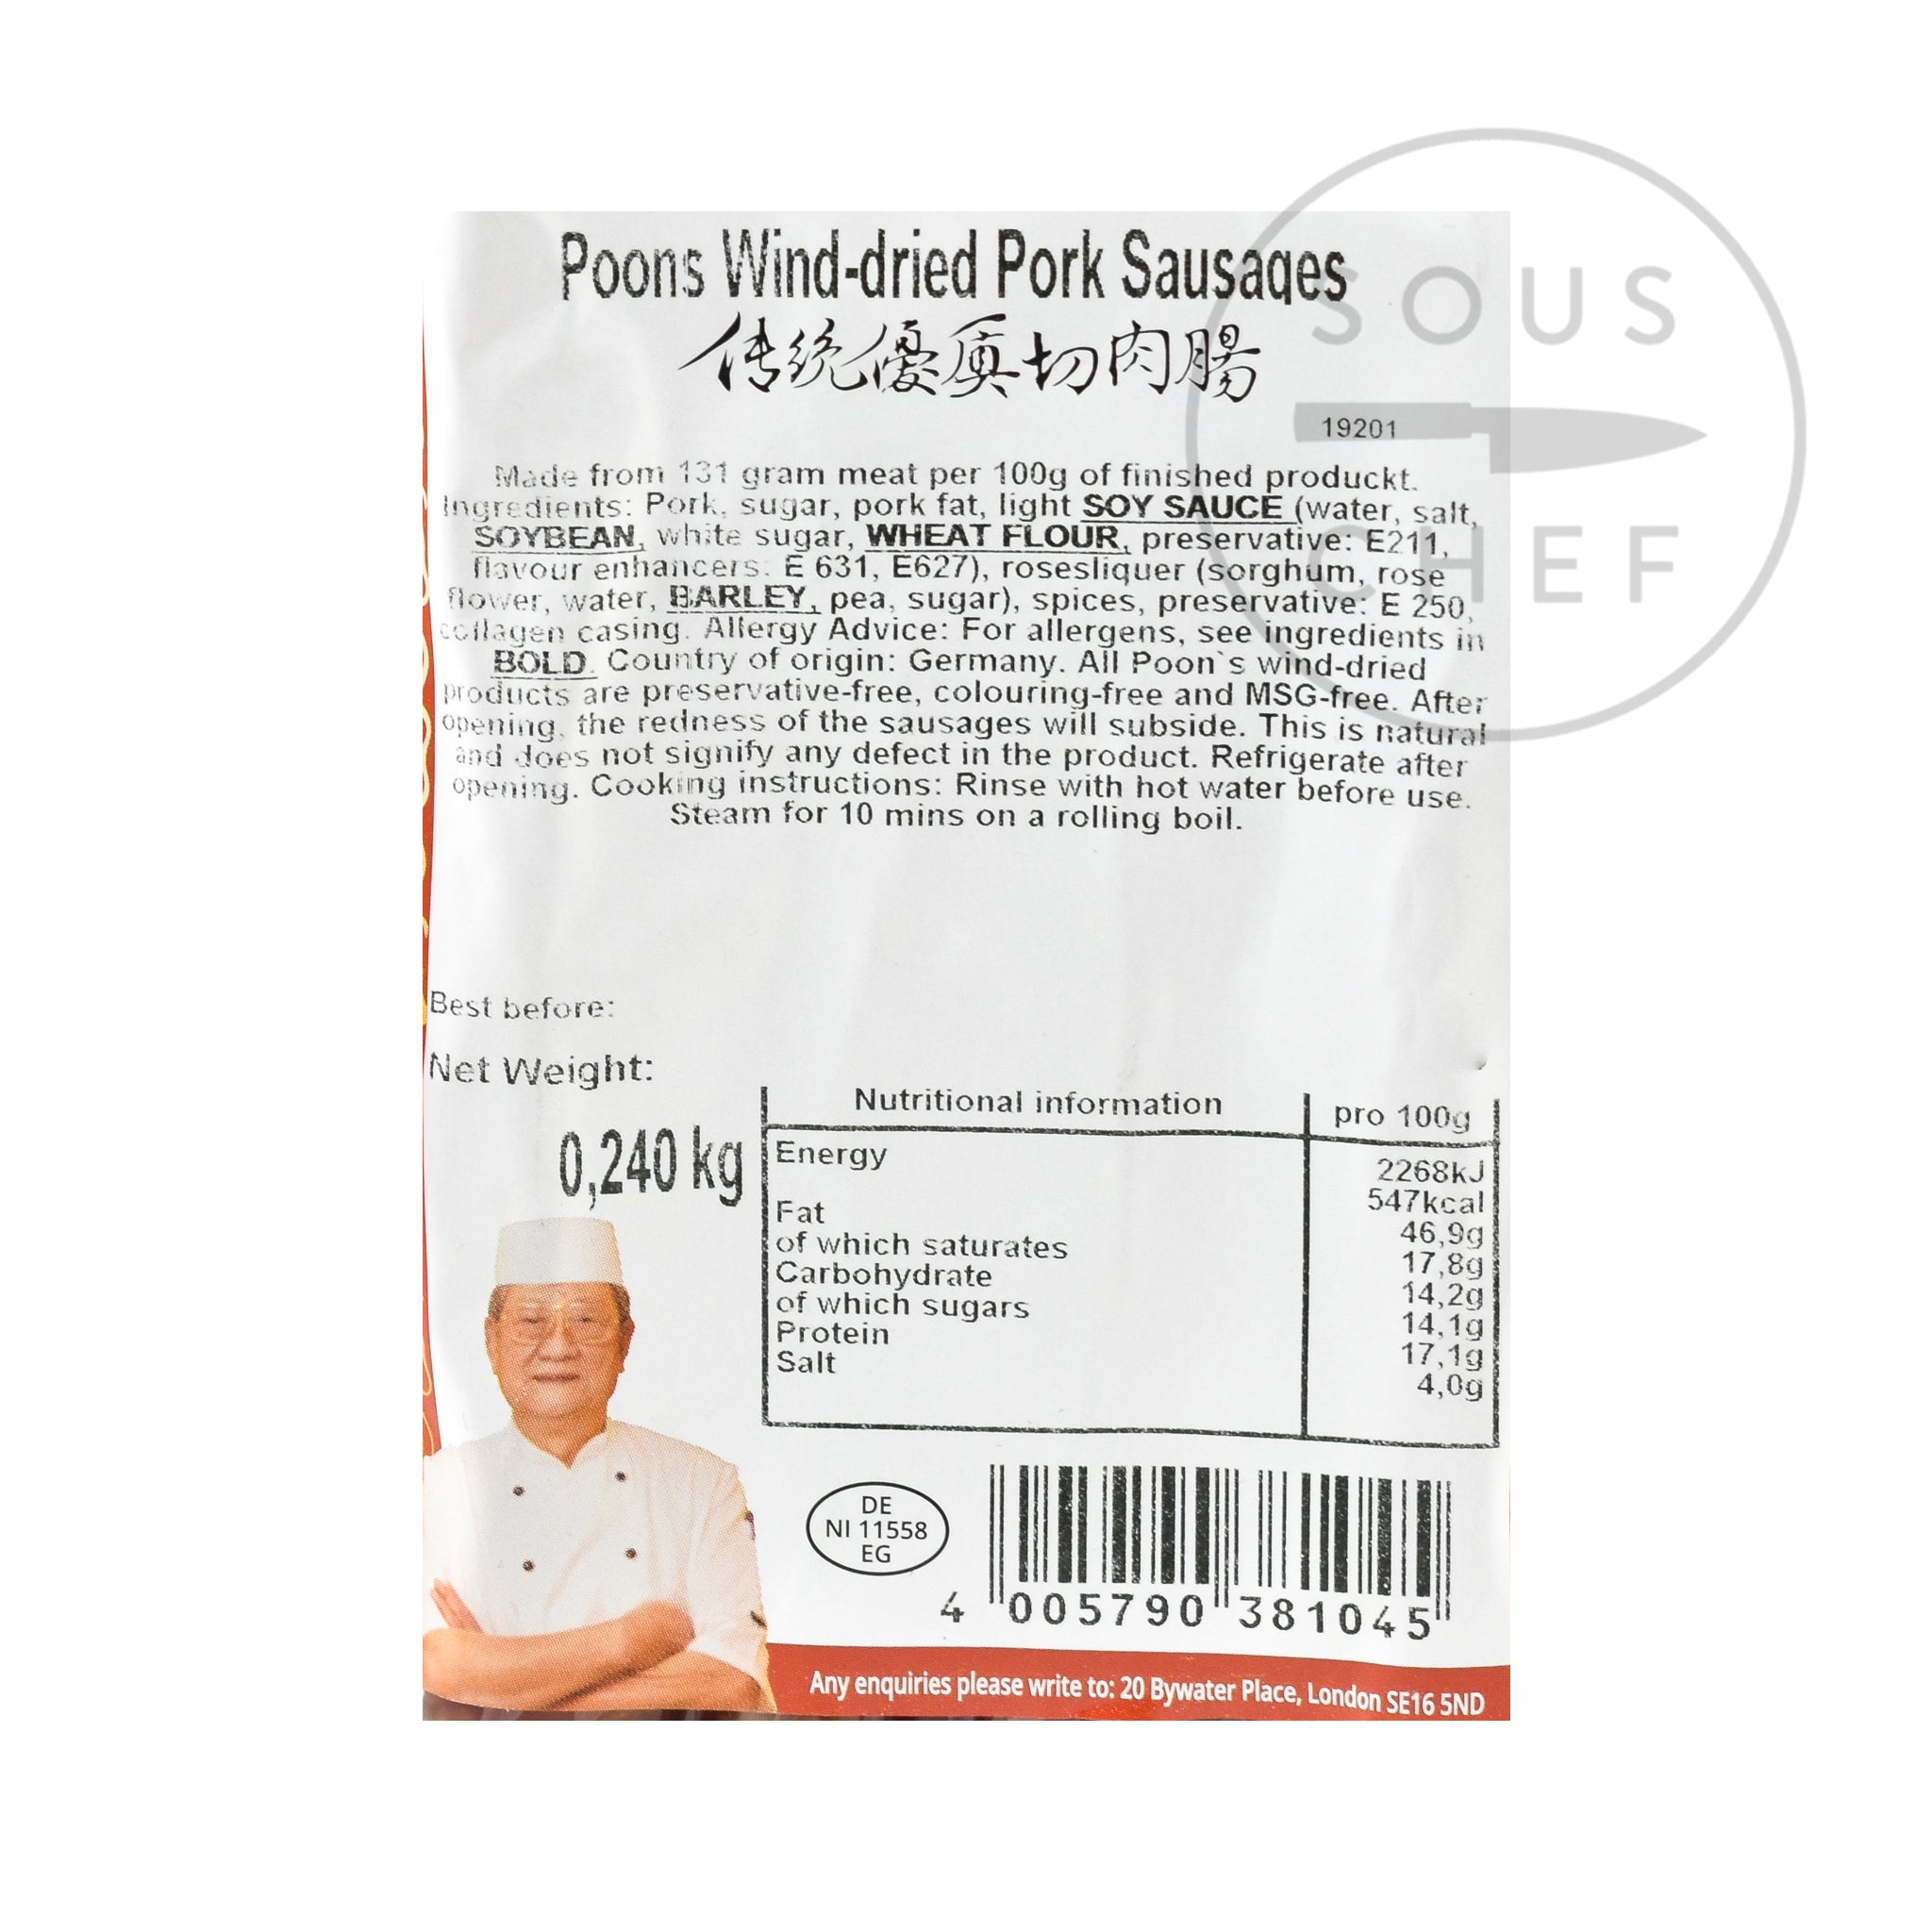 Poon's Chinese Wind-Dried Pork Sausage 240g nutritional information ingredients